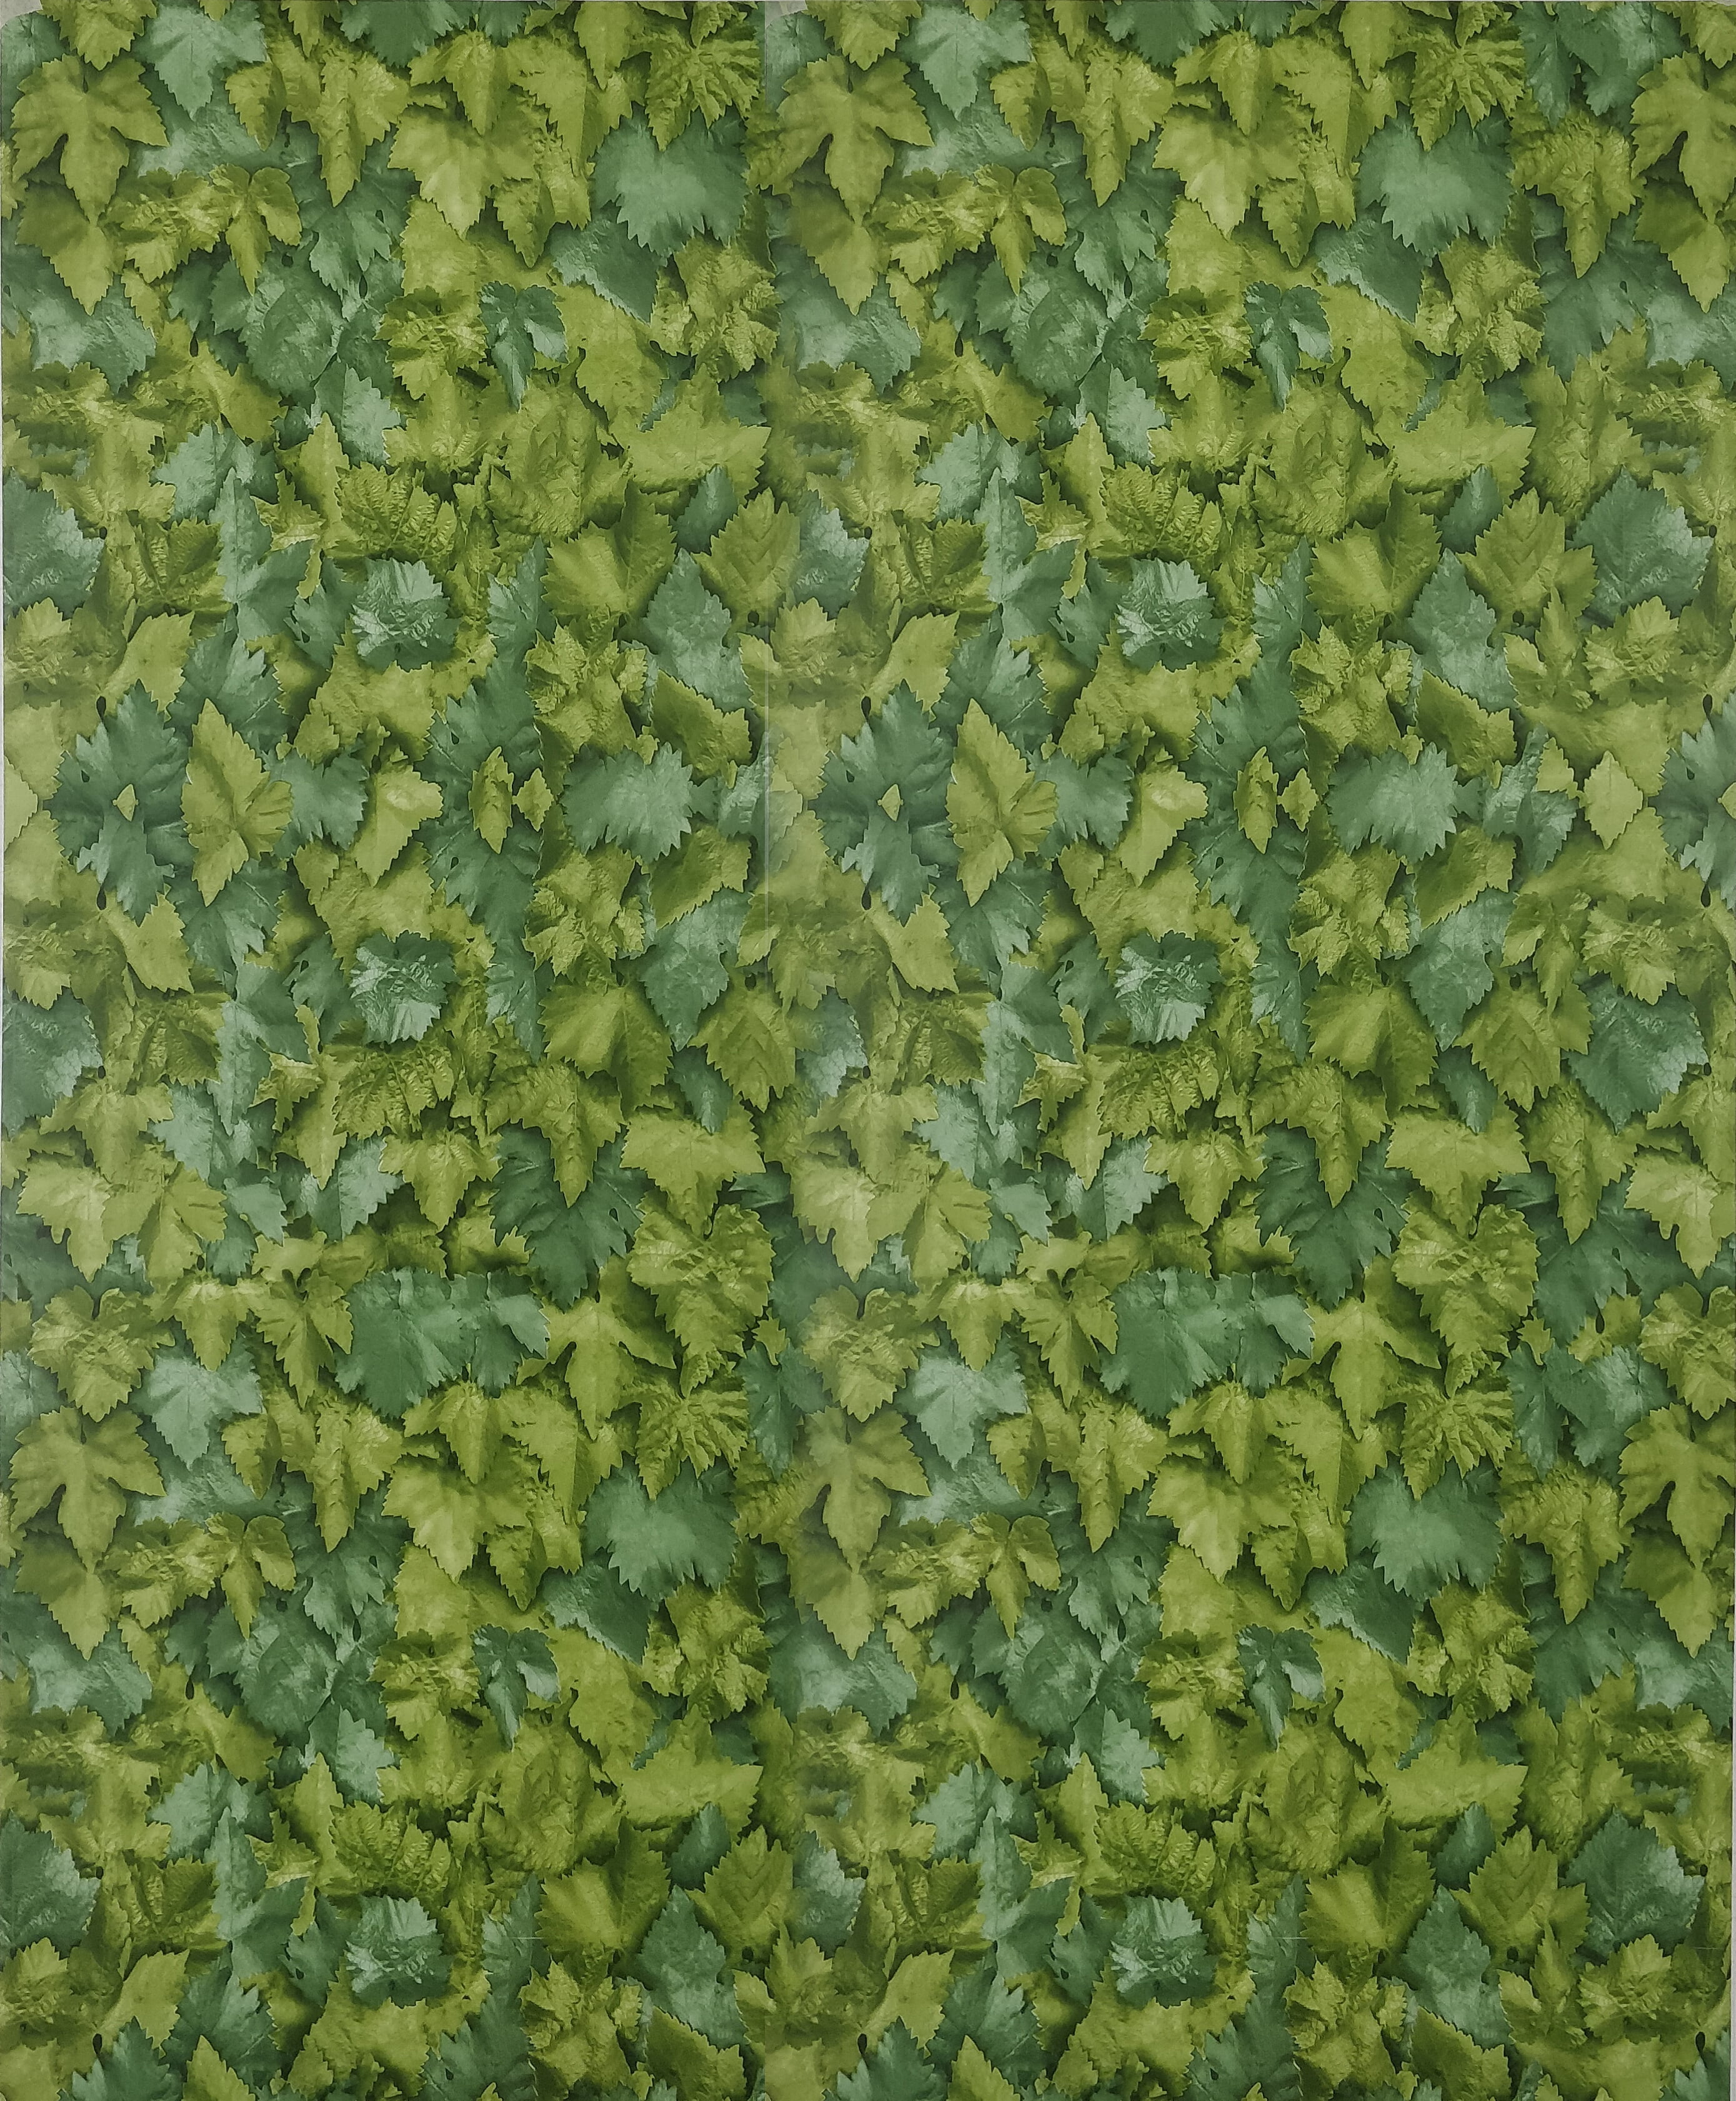 Dundee Deco's Floral Printed Green Leaves Peel and Stick Self Adhesive